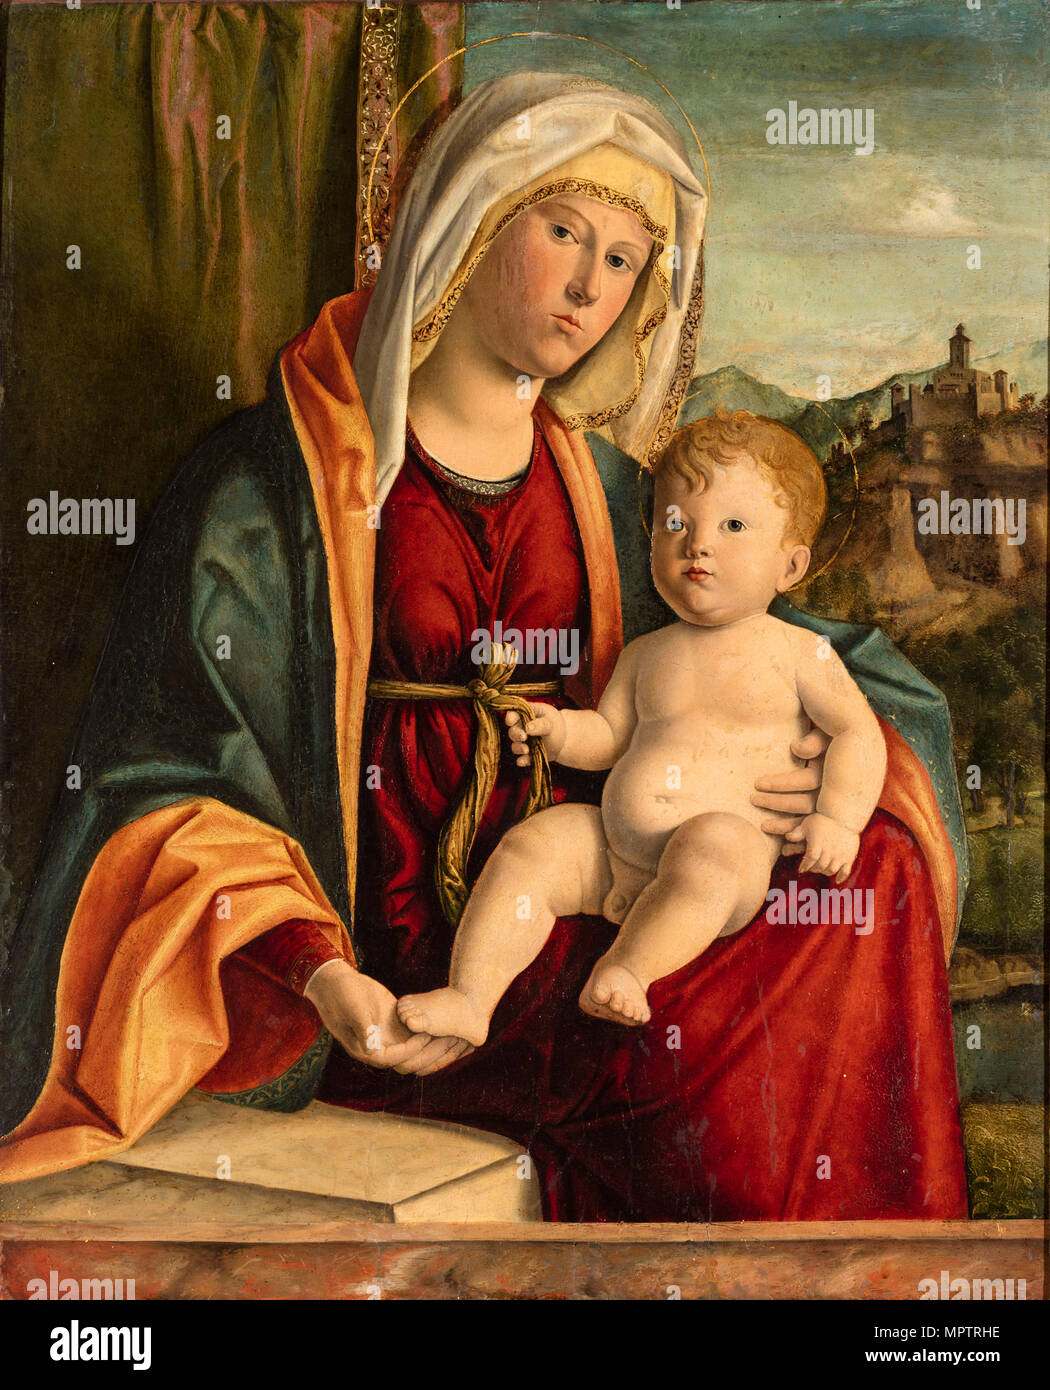 Virgin and Child. Stock Photo